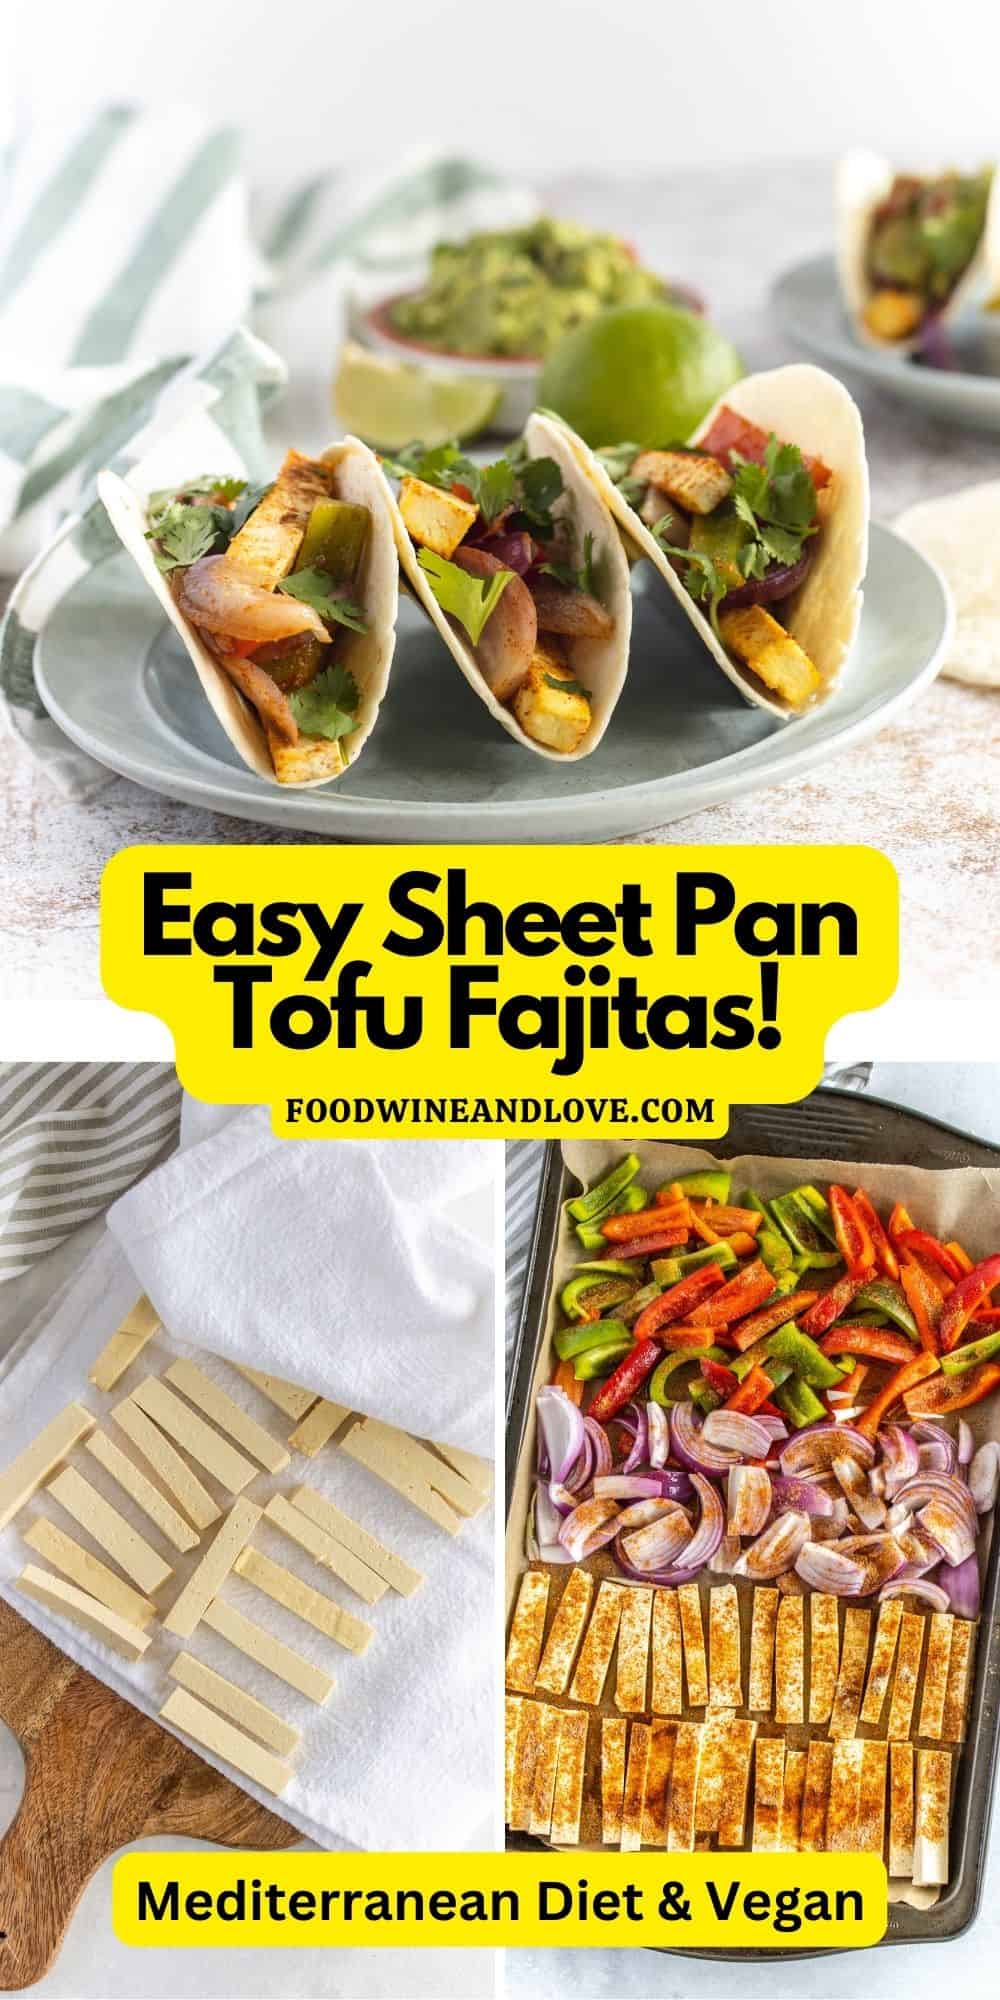 Easy Tofu Sheet Pan Fajitas (Vegan MedDiet), a simple and delicious 30 minute dinner recipe made with healthy ingredients.